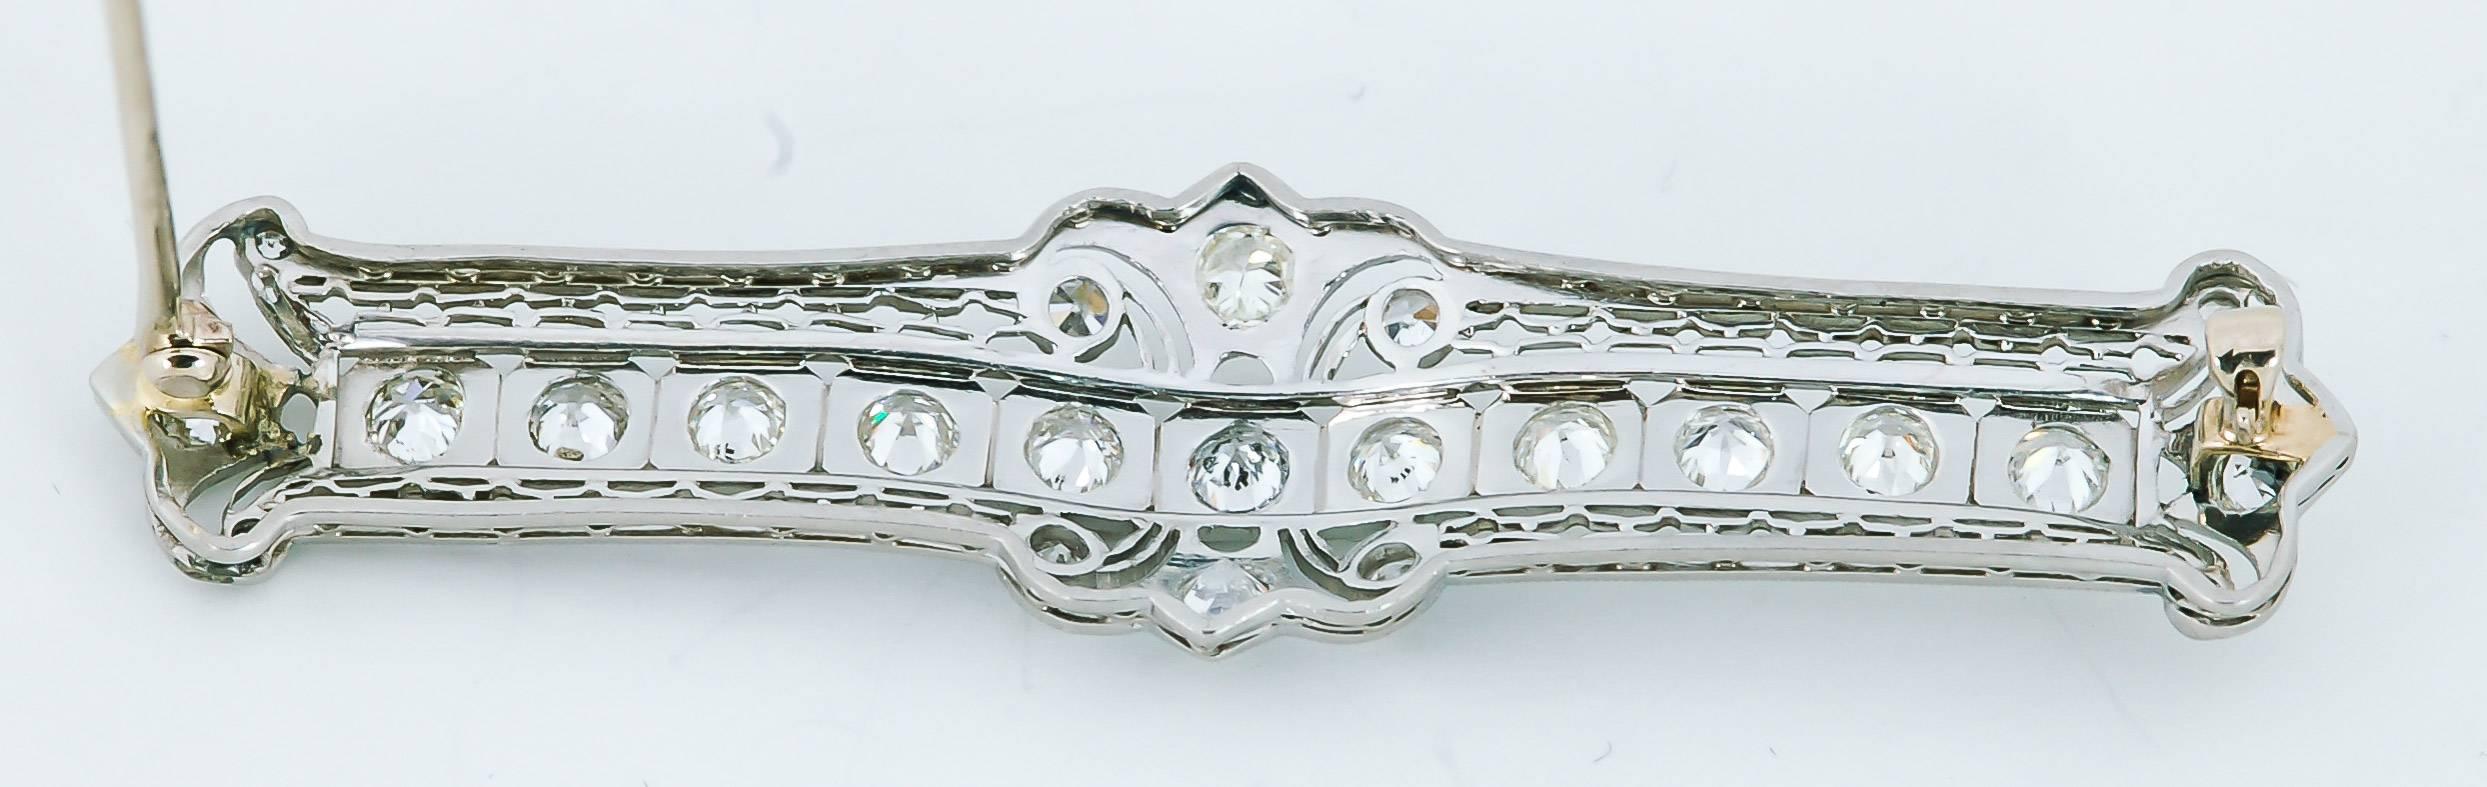 Eleven captivating Old European cut diamonds dance across this antique brooch. A delicate filigree design reminiscent of the Art Nouveau style is prominently displayed in this stunning brooch. It features Old European diamonds set in platinum with a